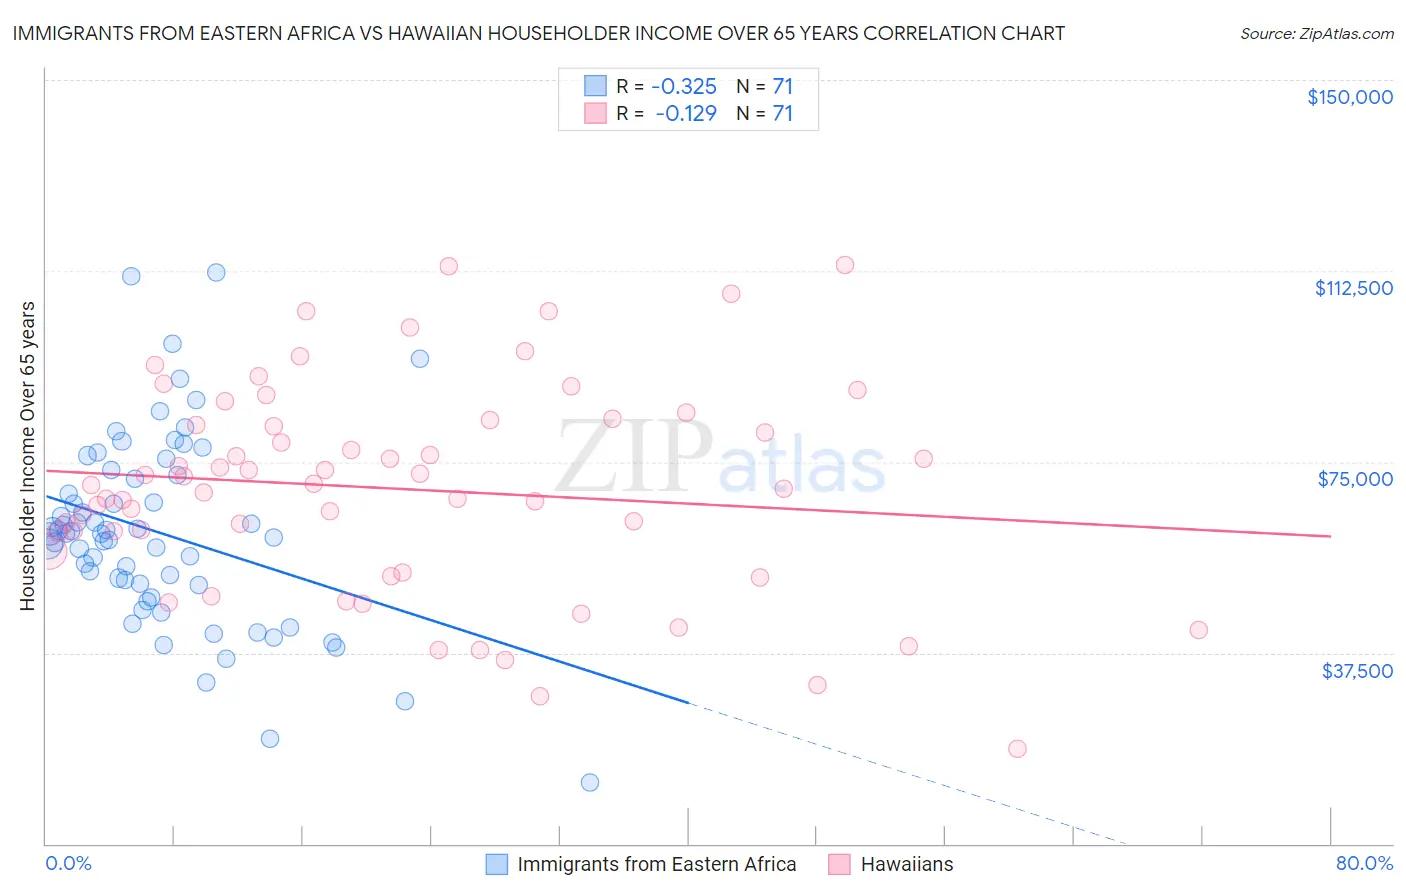 Immigrants from Eastern Africa vs Hawaiian Householder Income Over 65 years